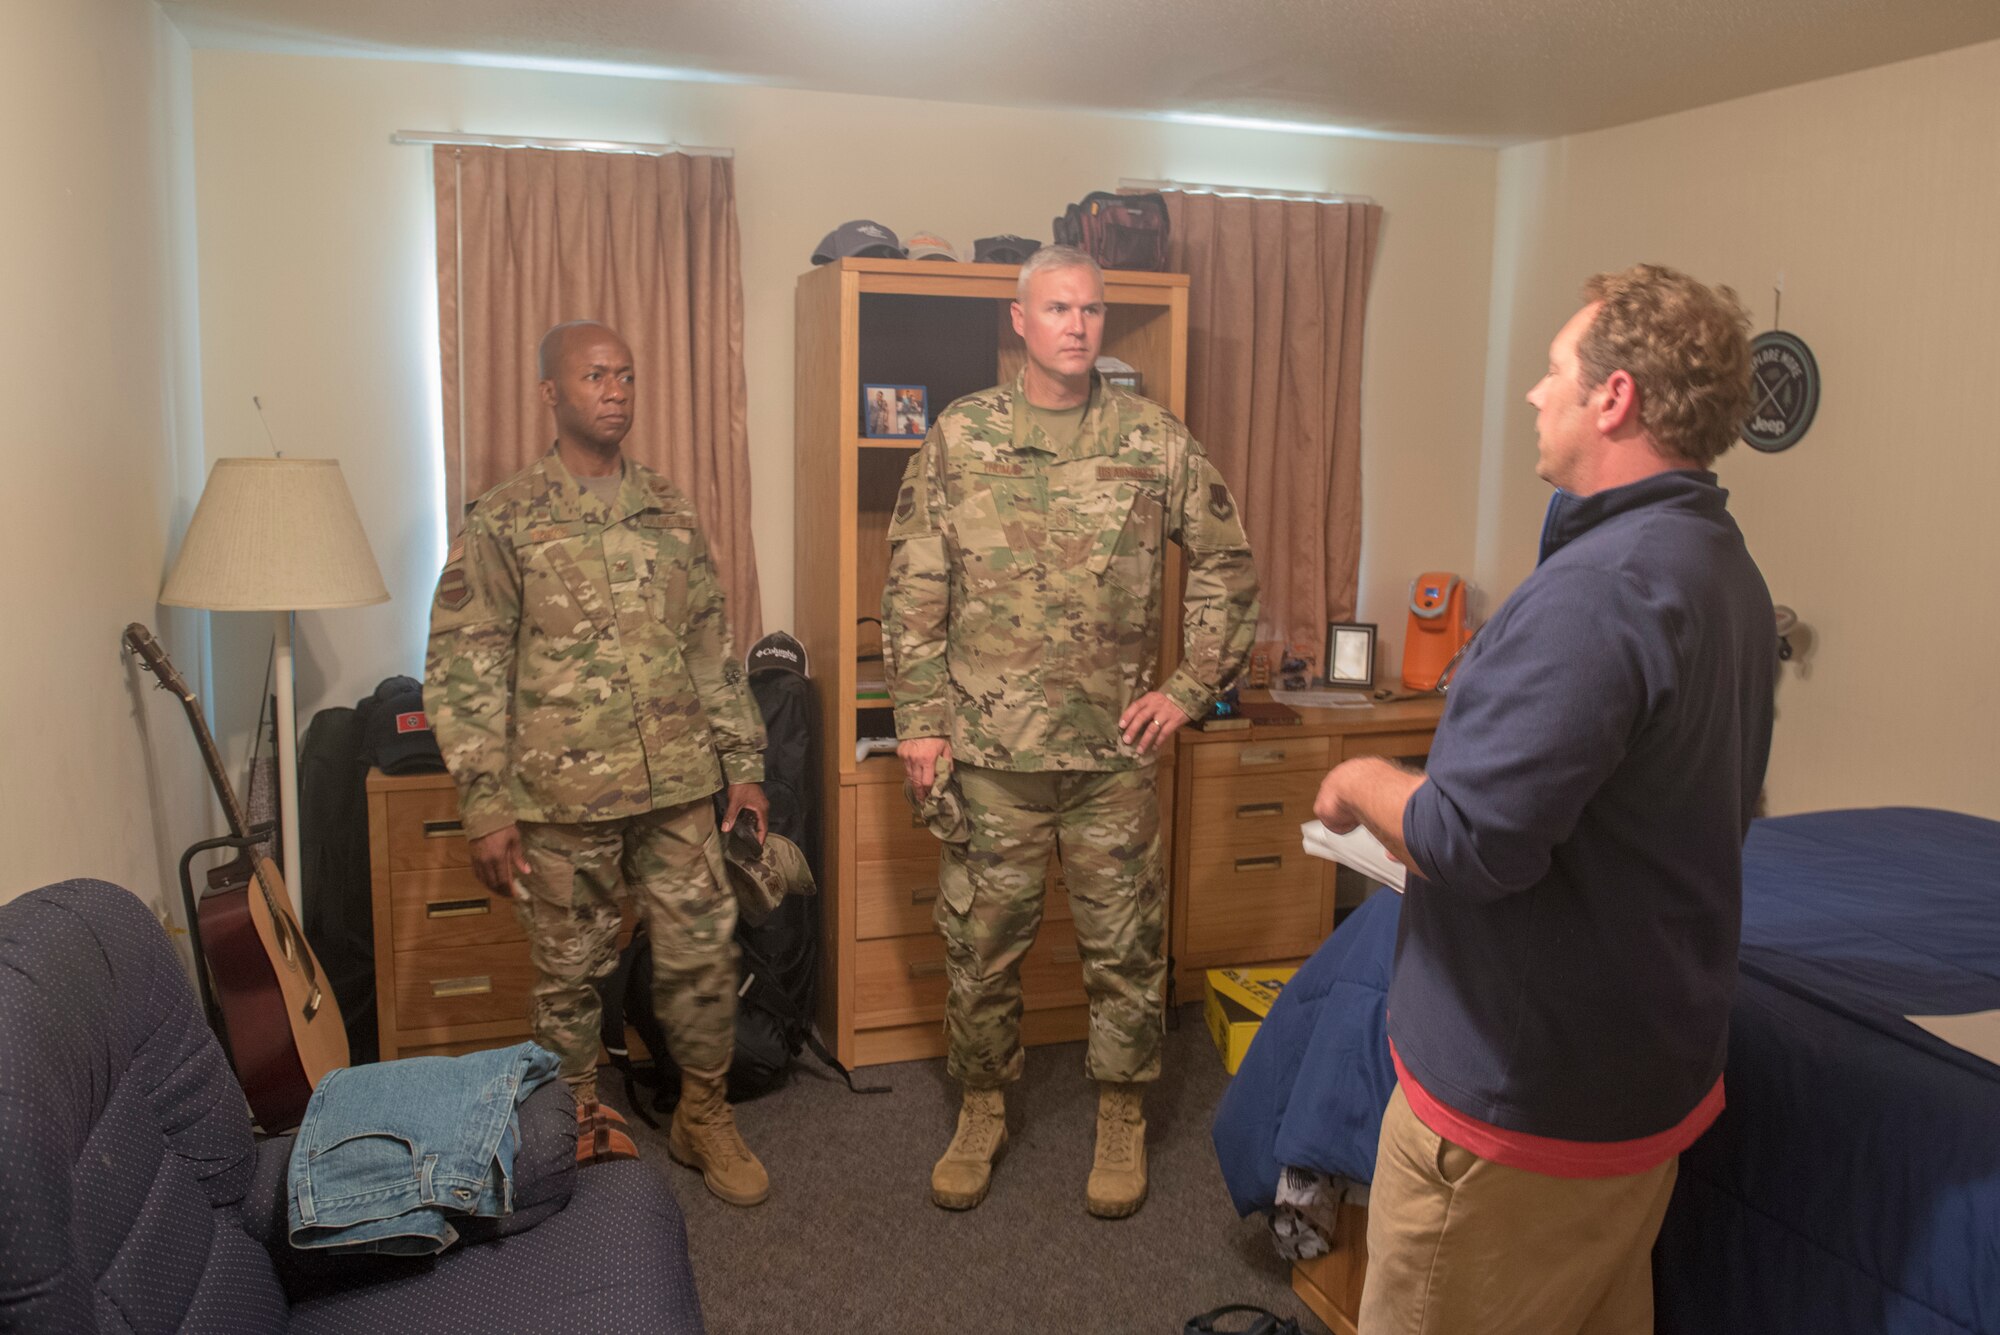 A housing representative shows Col. Gavin Marks, left, 55th Wing commander, and Chief Master Sgt. Brian Thomas, center, 55th Wing command chief, a dormitory room during a tour of the base dormitories Aug. 9, 2019. The walk-through was done as part of a wing-wide health and safety review of housing. At this point, 55th Wing leadership has surveyed 1,233 housing units and inspected 418 dormitory and 57 lodging rooms.